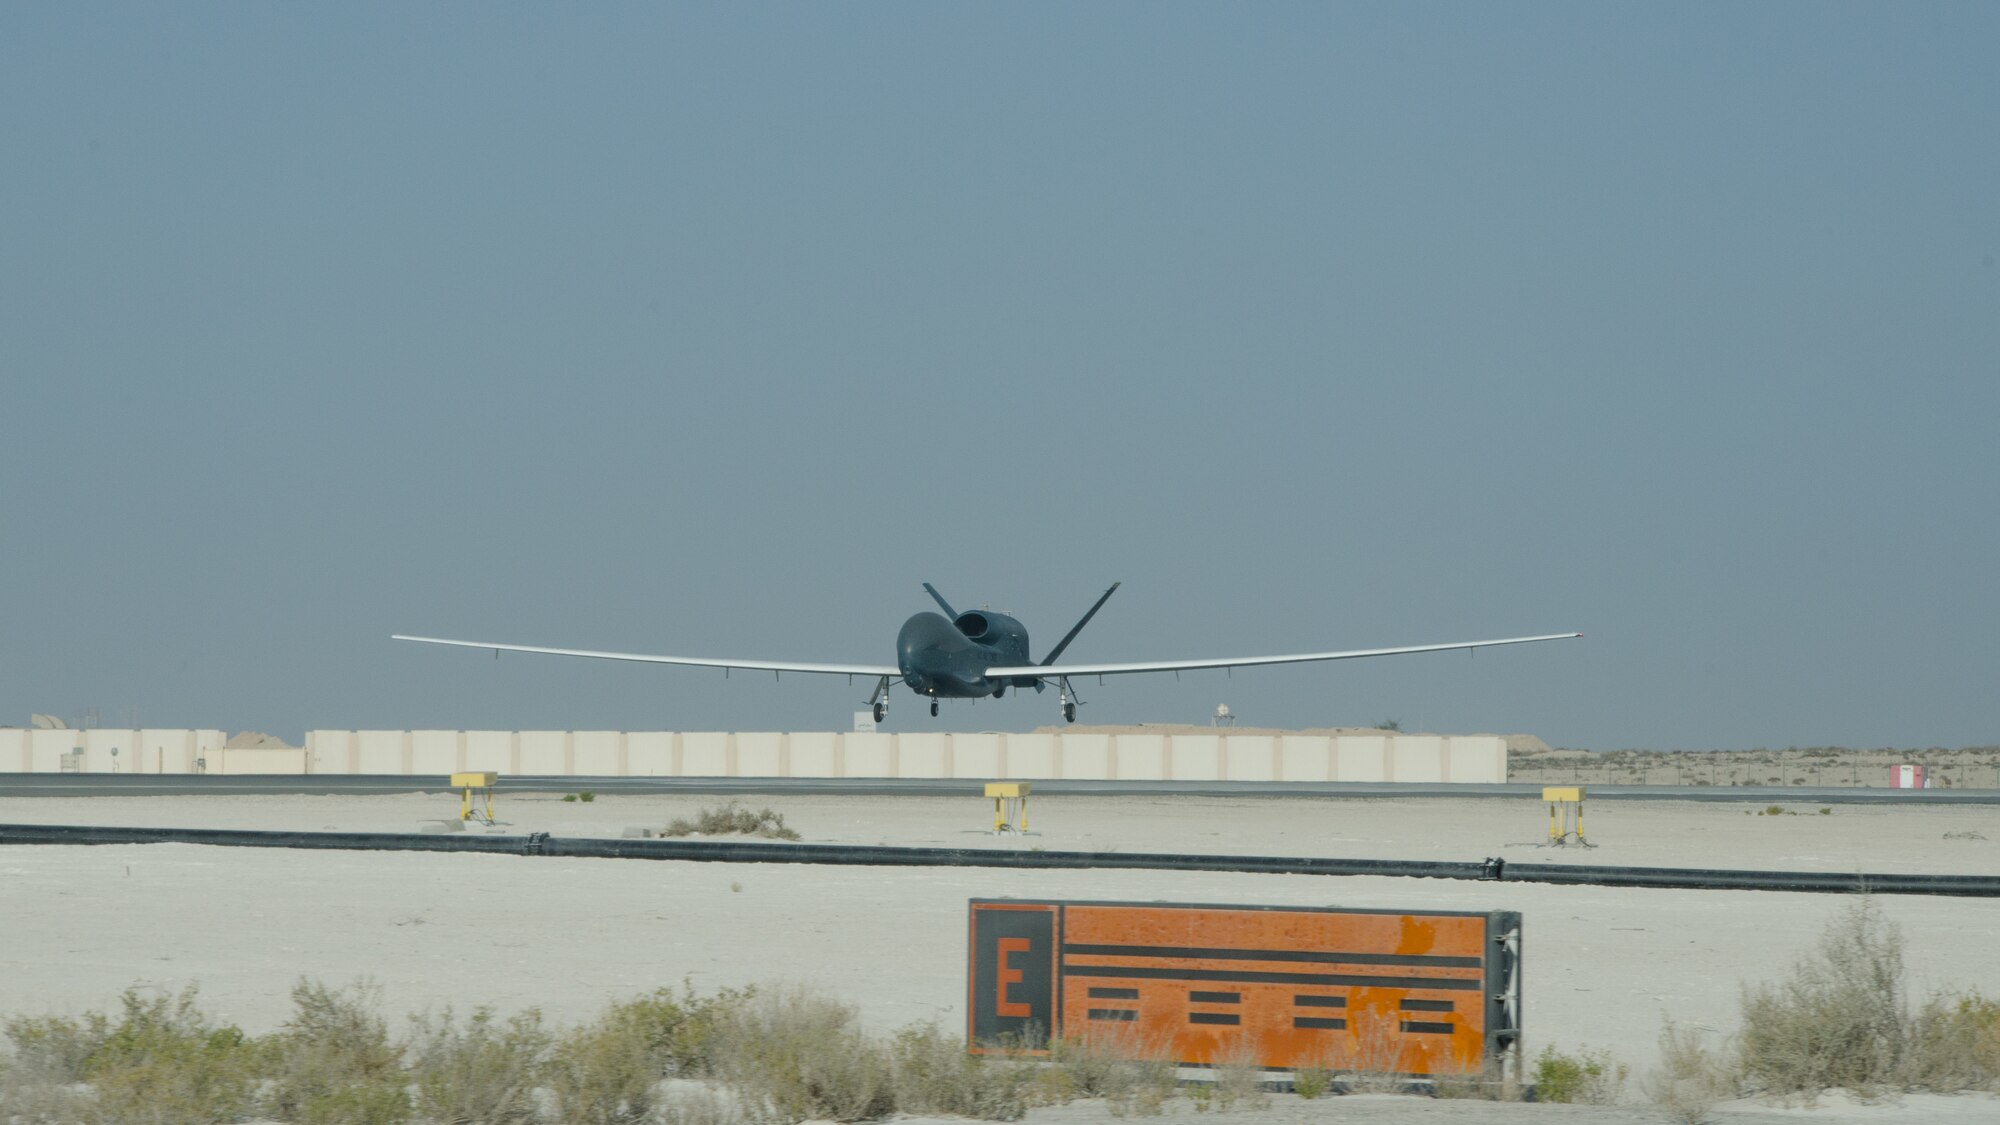 An U.S. Air Force RQ-4 Global Hawk logs over 20,000 flight hours Feb. 13, 2018 at Al Dhafra Air Base, United Arab Emirates. The Global Hawk's mission is to provide a broad spectrum of ISR collection capability to support joint combatant forces in worldwide peacetime, contingency and wartime operations. (U.S. Air National Guard photo by Staff Sgt. Colton Elliott)